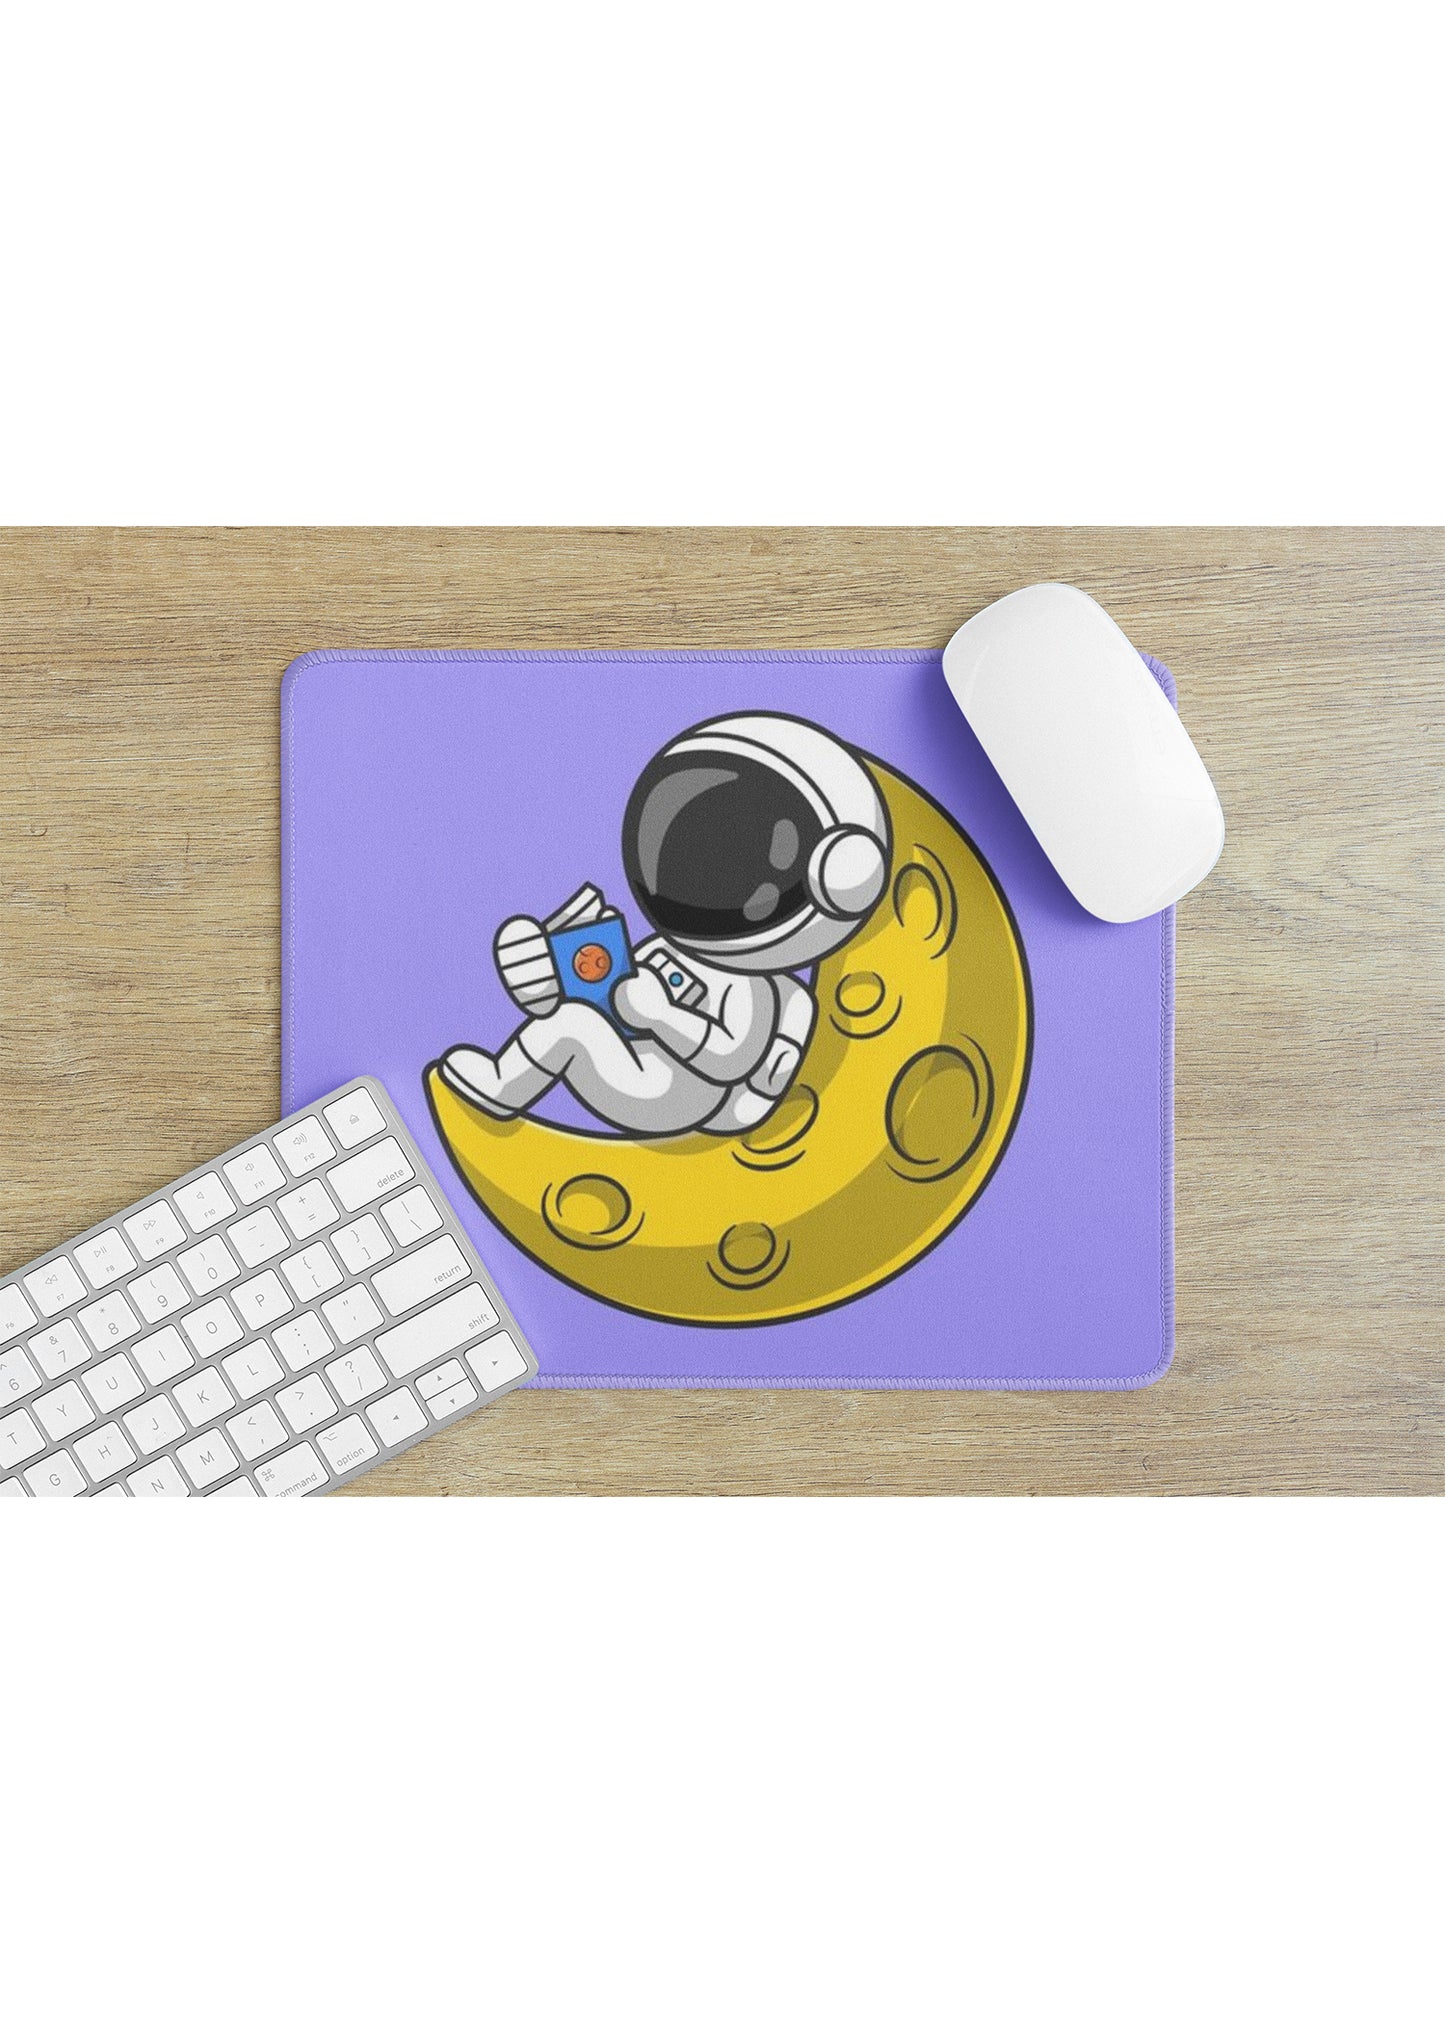 ASTRONAUT MOUSE PAD